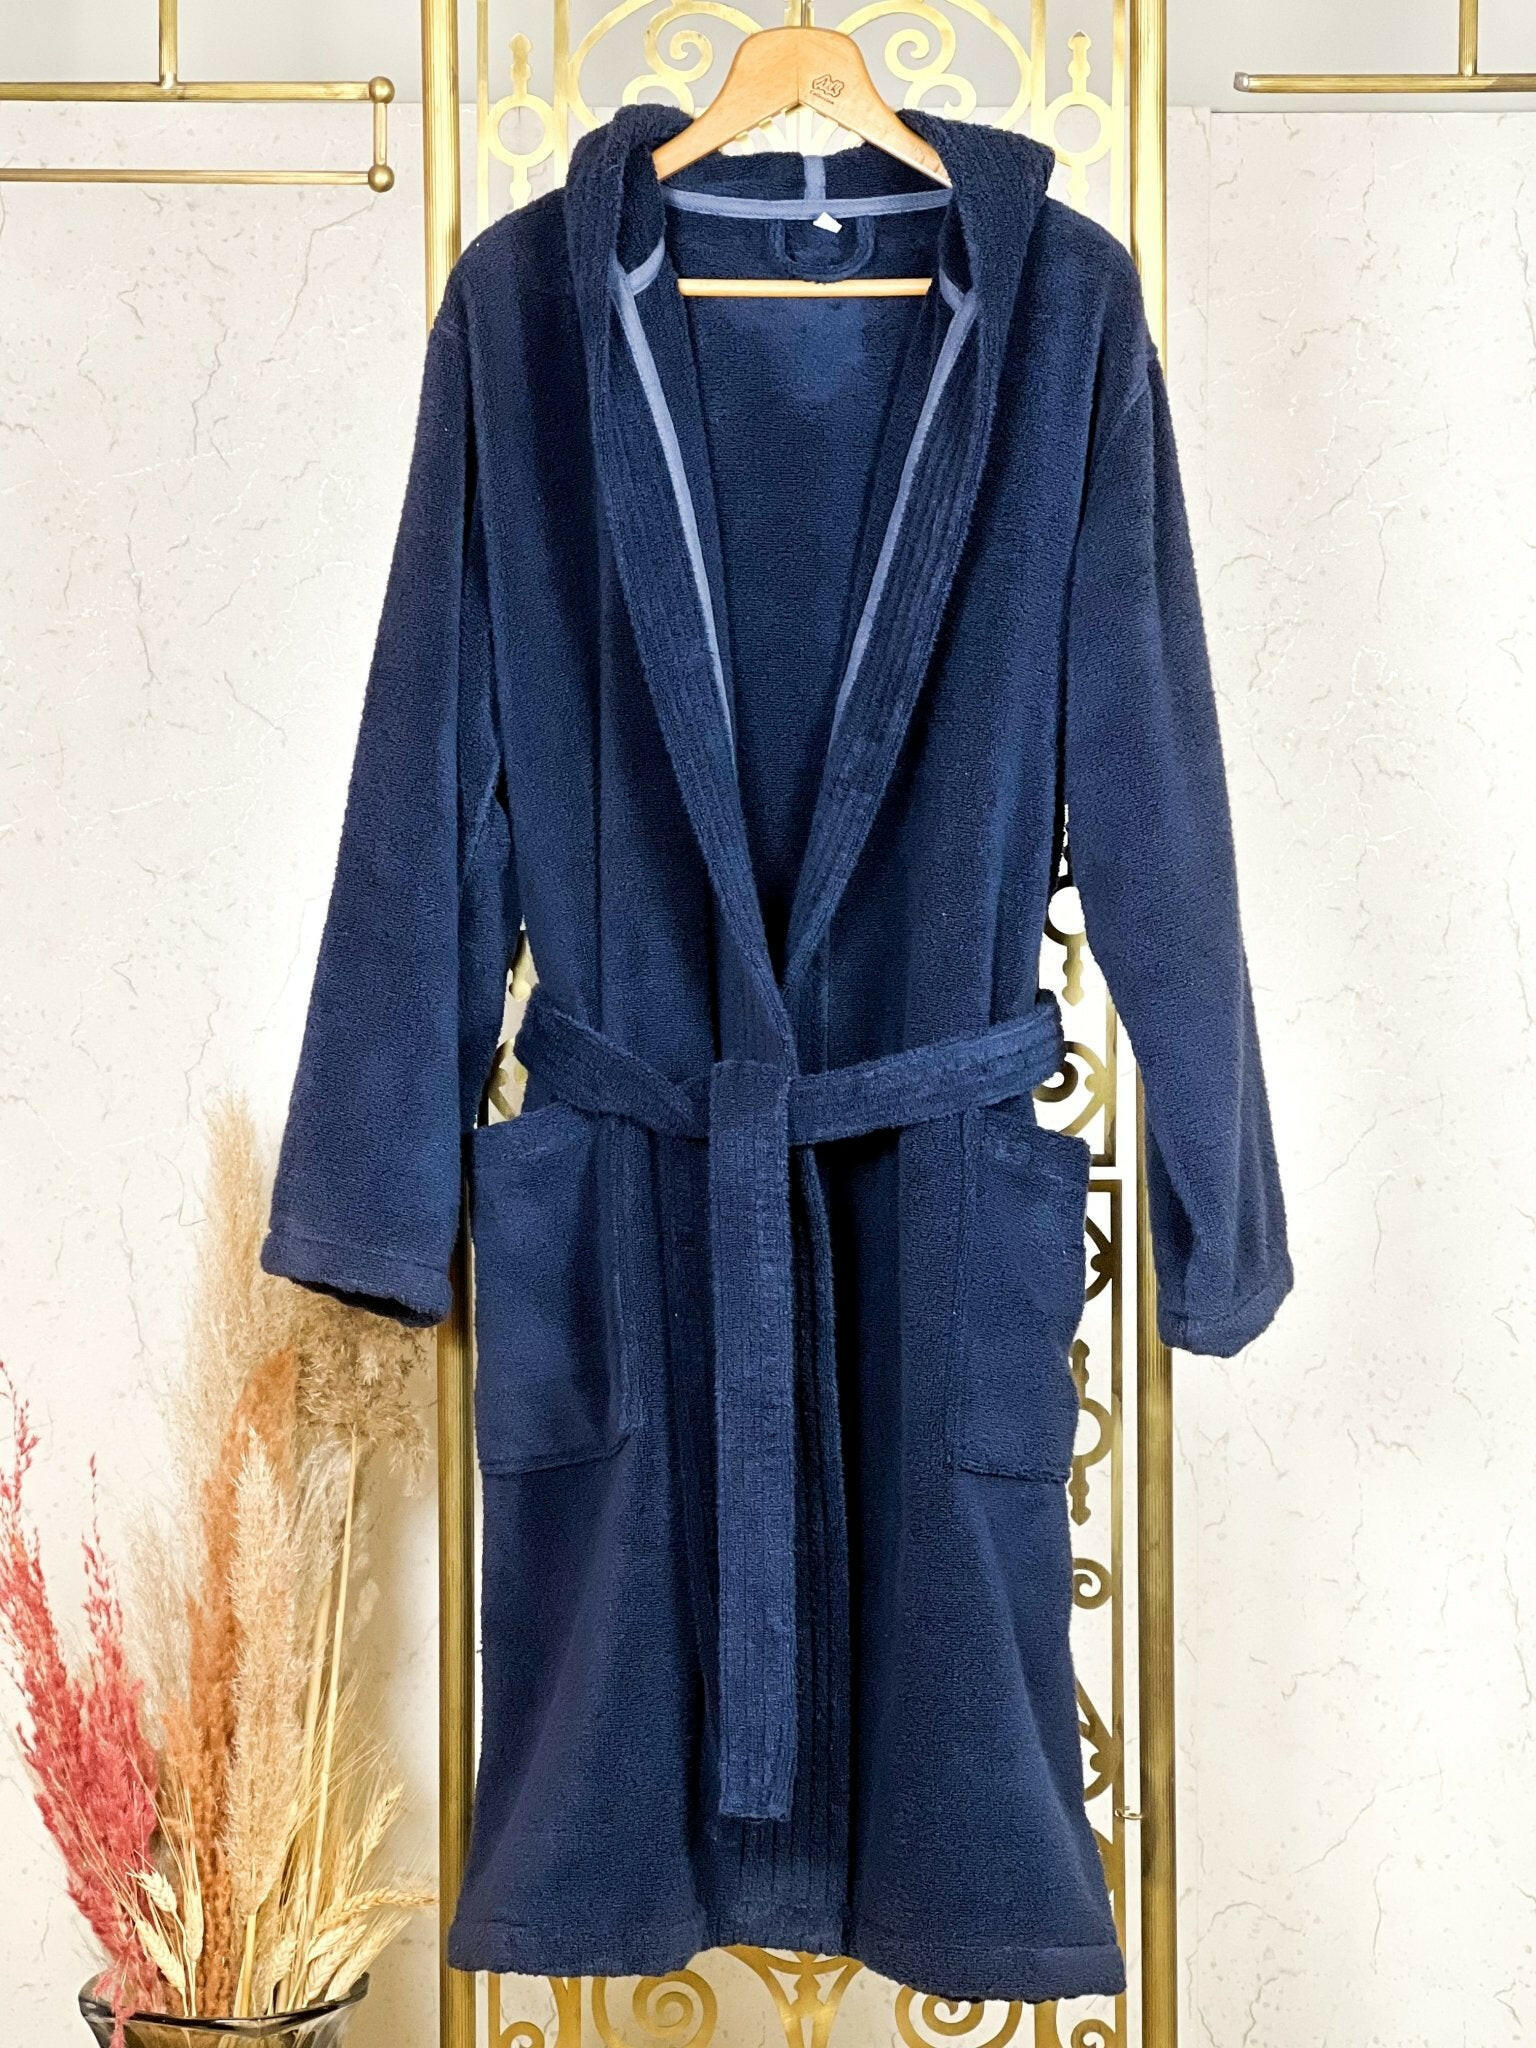 Akay Men's Navy Blue Hooded Bathrobe, Best Luxury Micro Cotton Soft Turkish Robe Gown by Creative Home